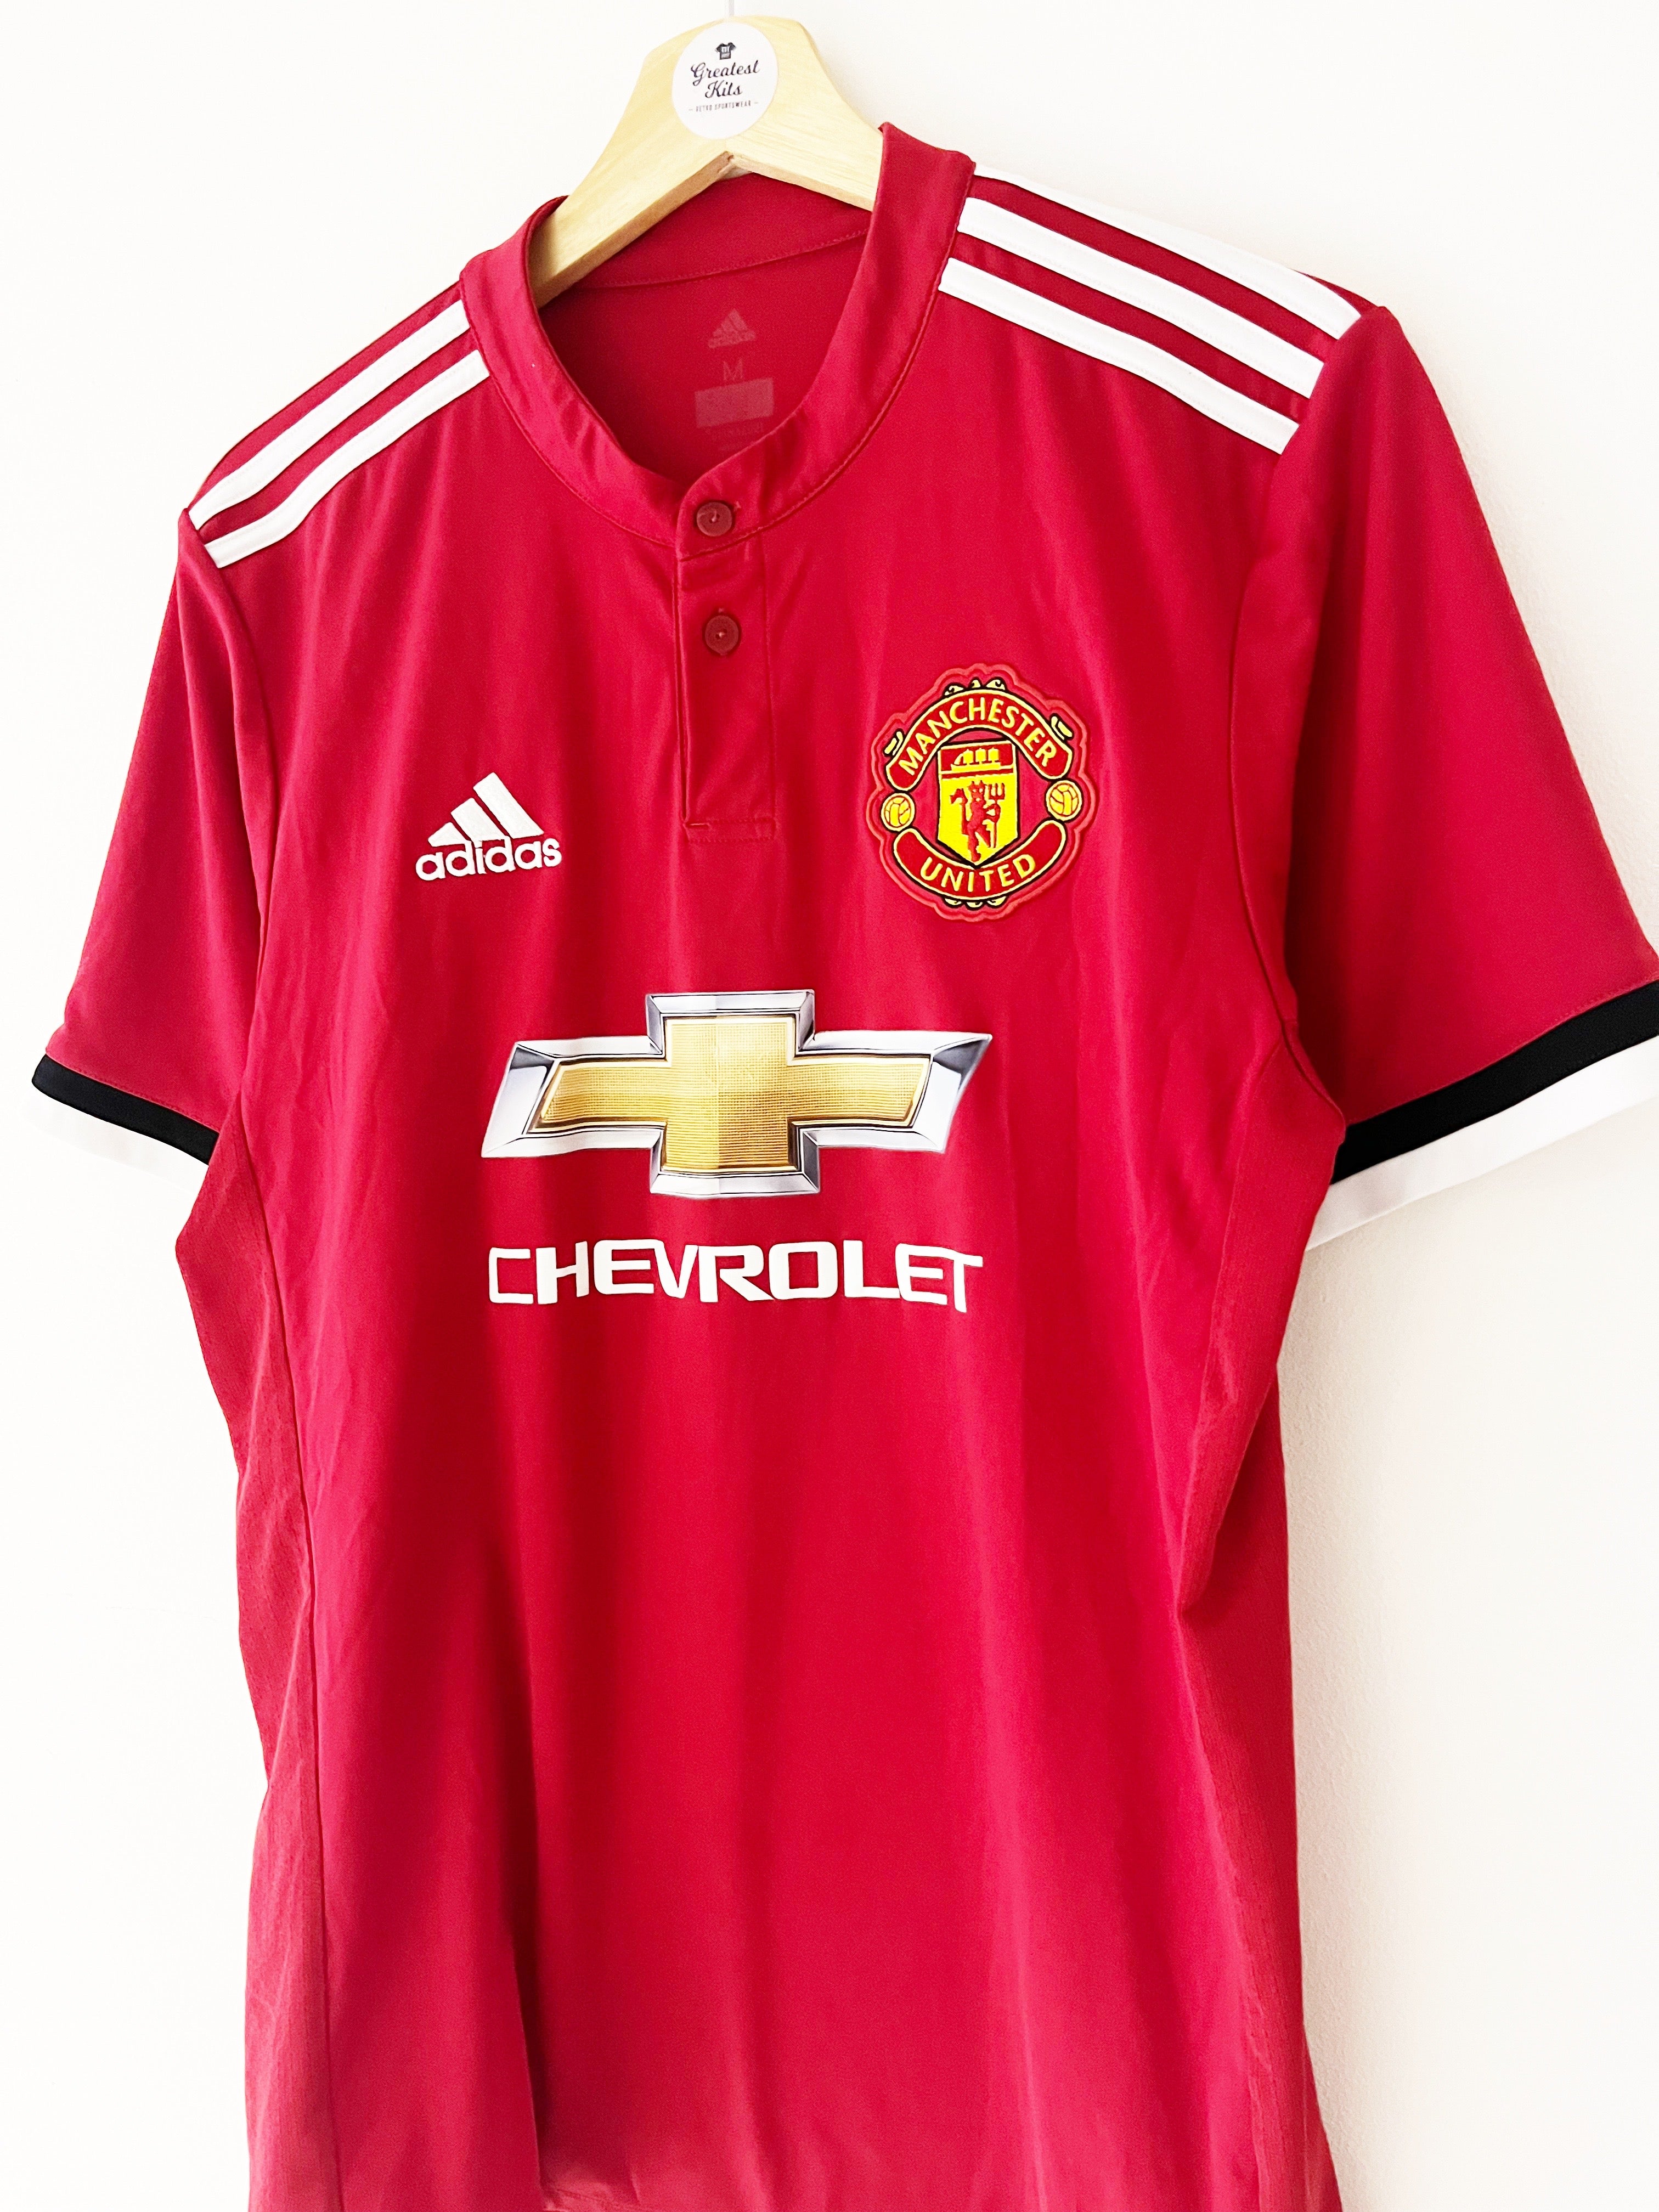 2017/18 Manchester United Home Shirt (M) 8/10